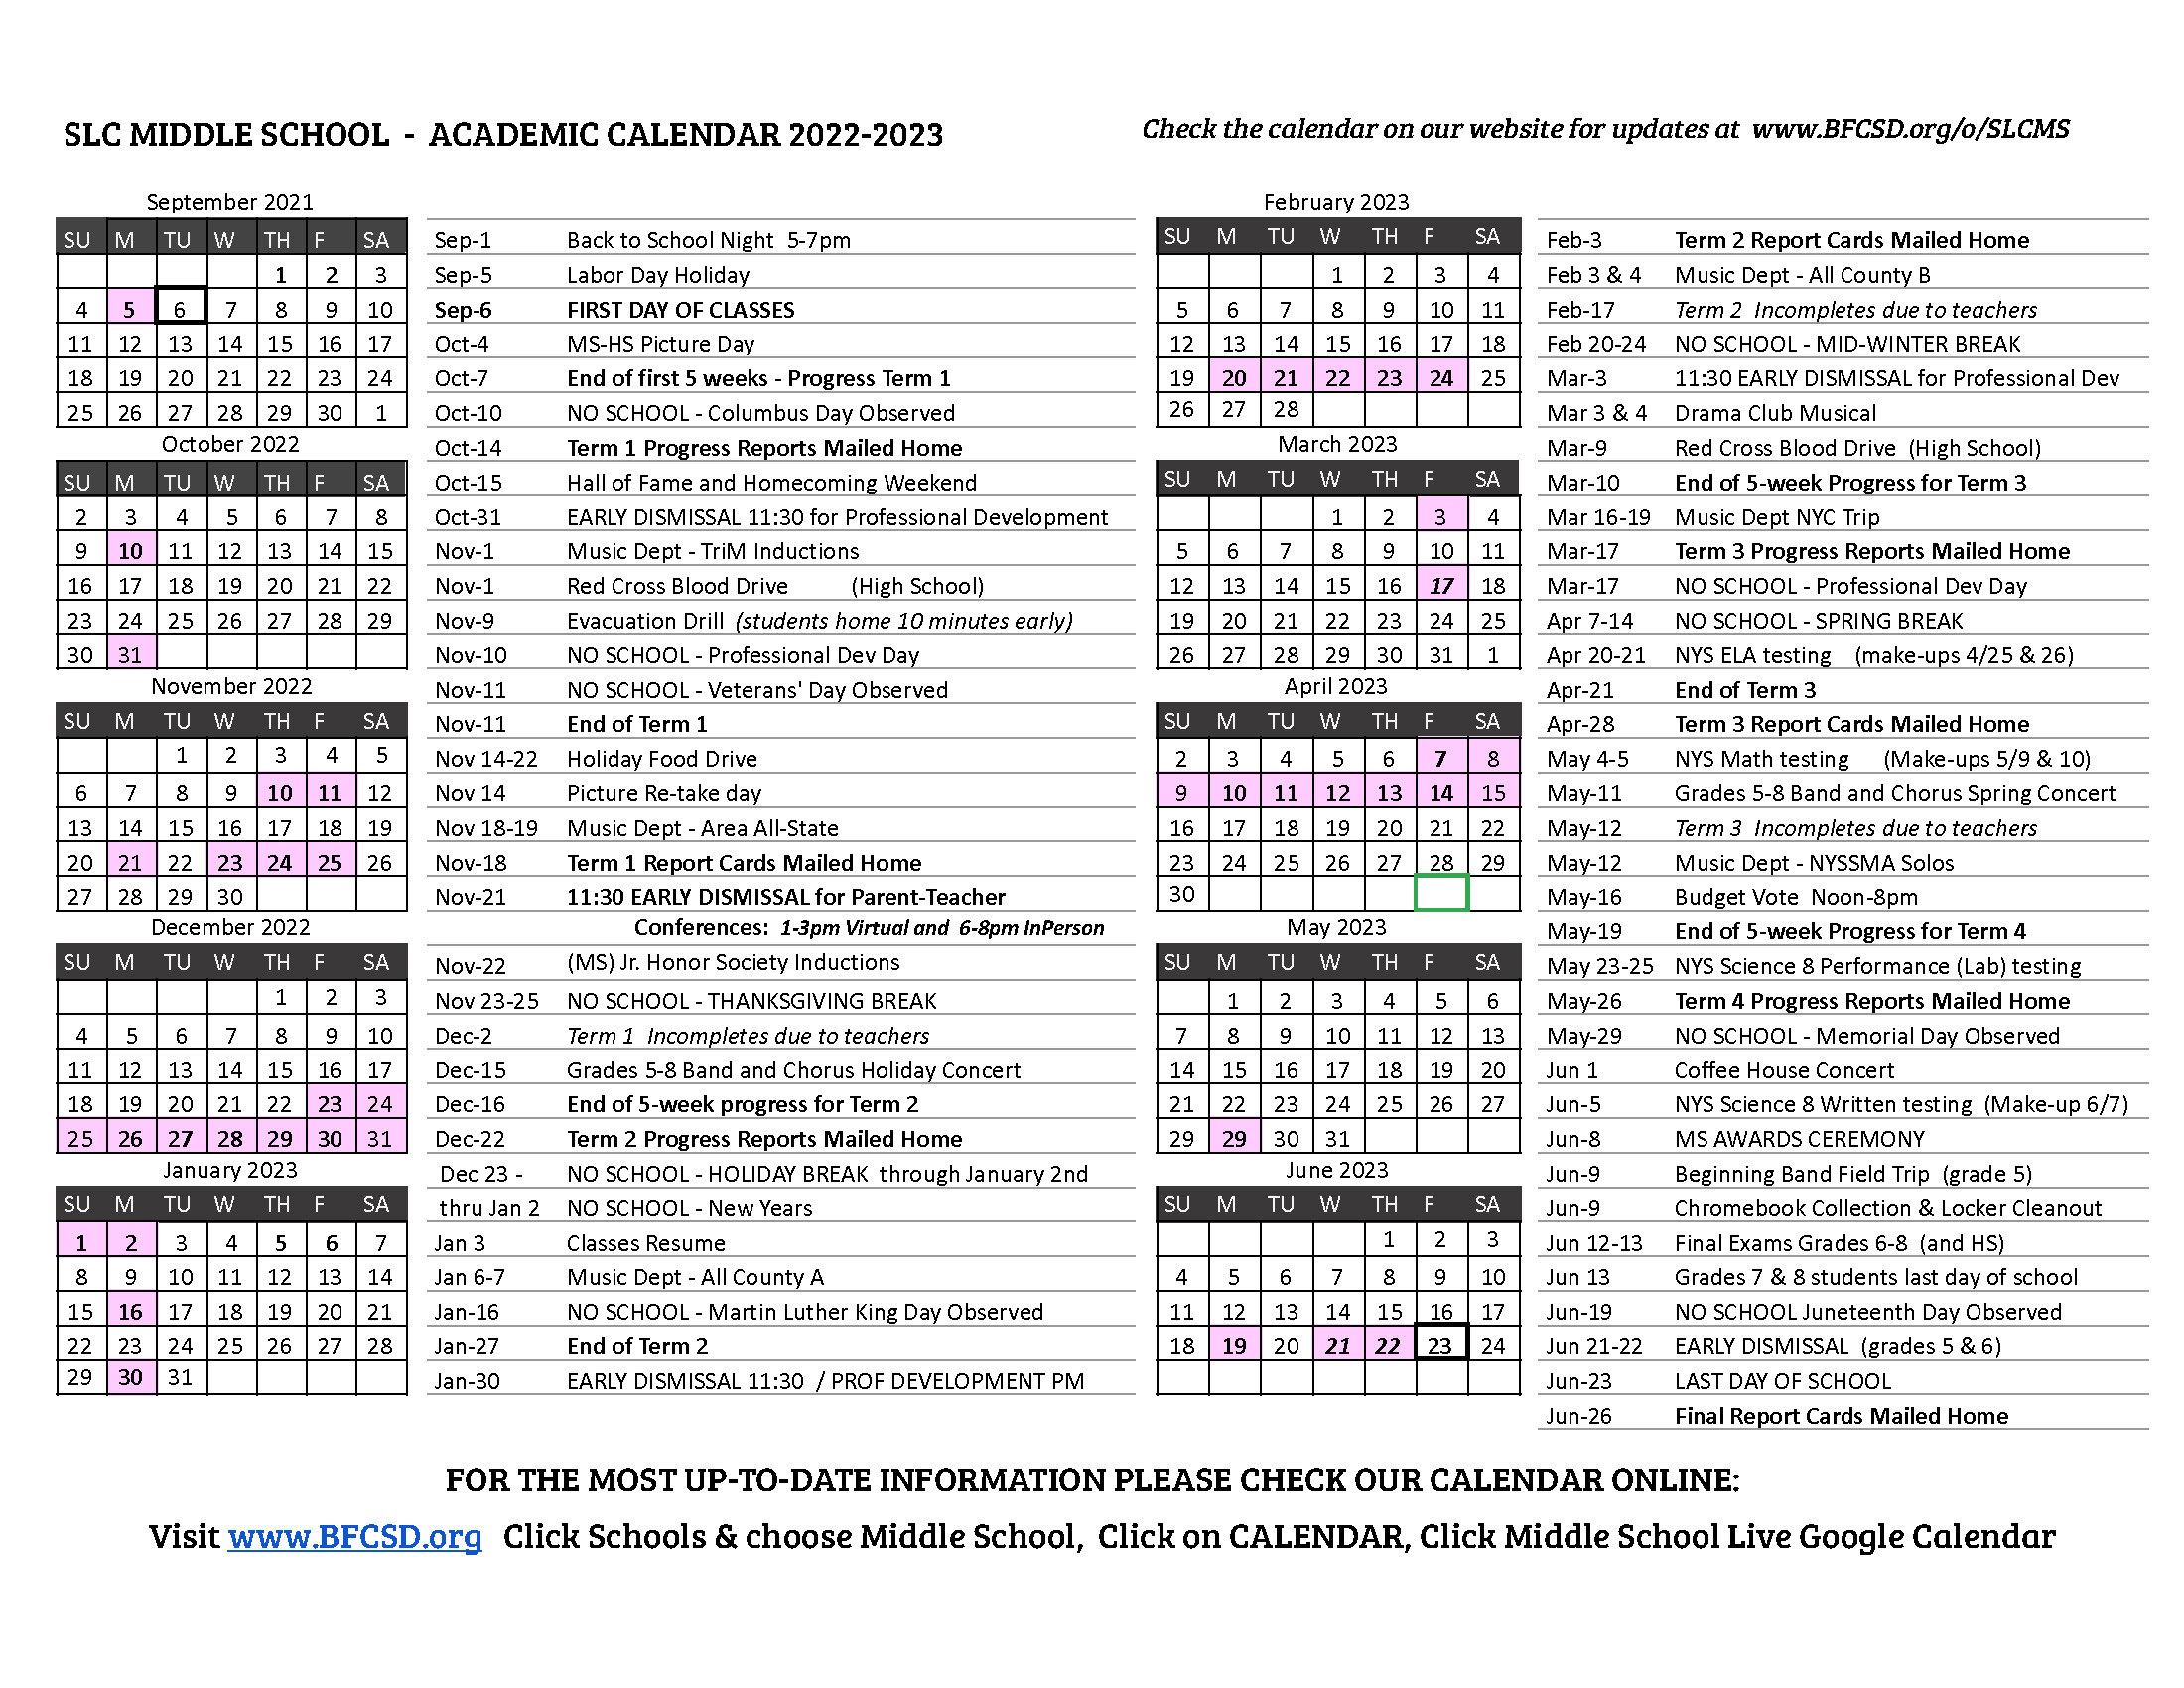 MS Academic Calendar of Events St. Lawrence Central Middle School